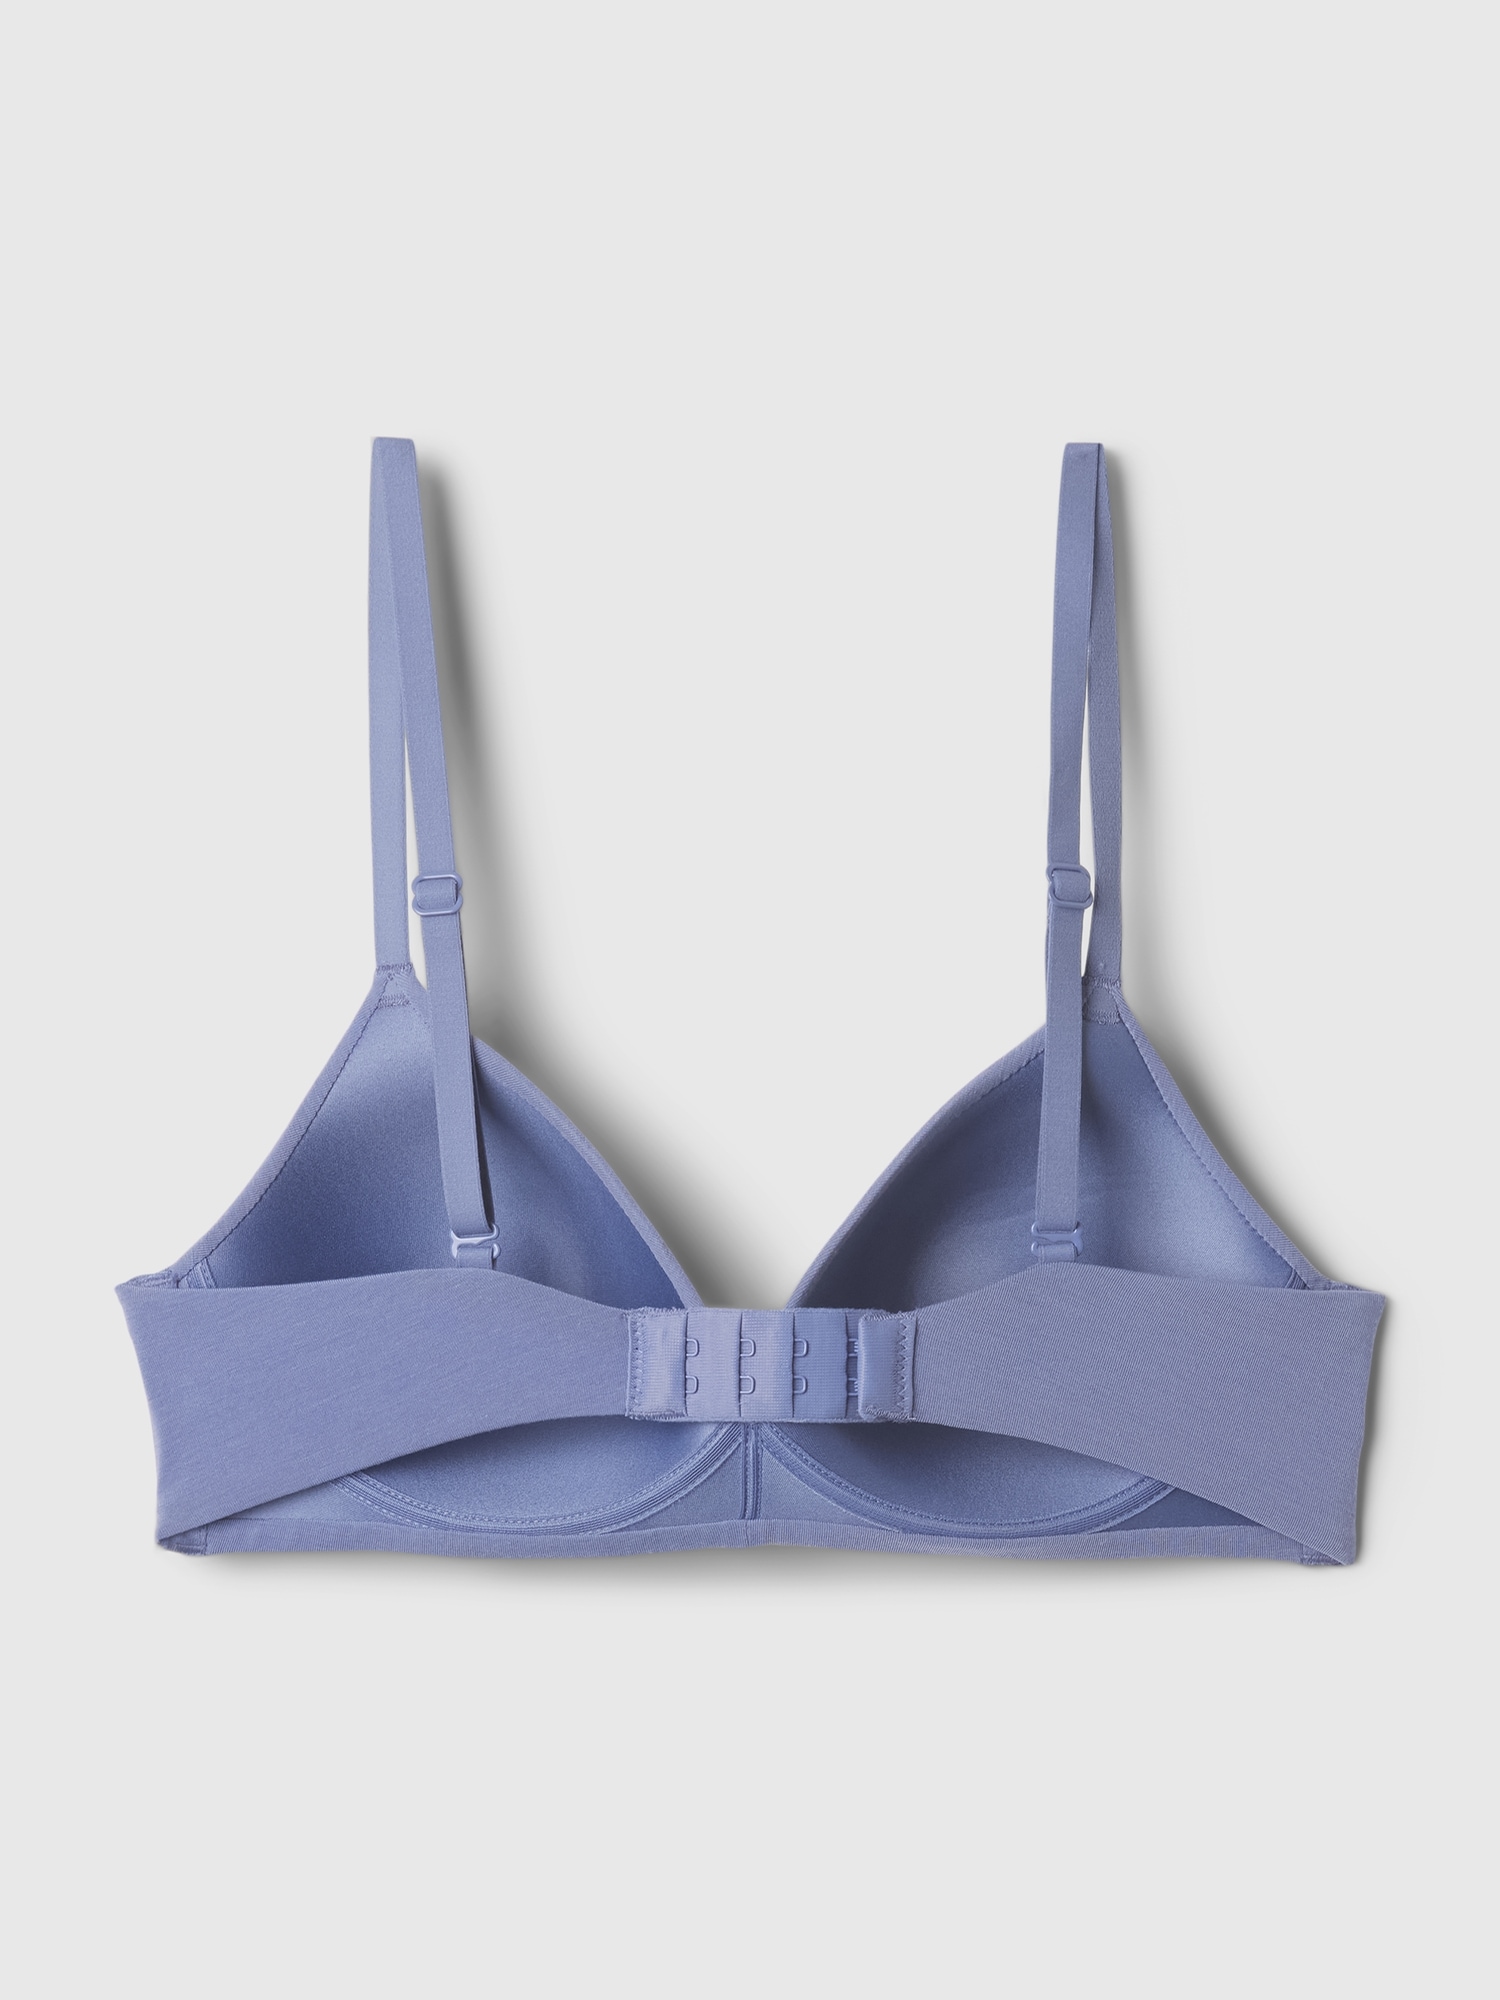 New collection Women Bra Wireless bra من غير حديدة 3 pack Available sizes  32 34 36 38 A b c d By order